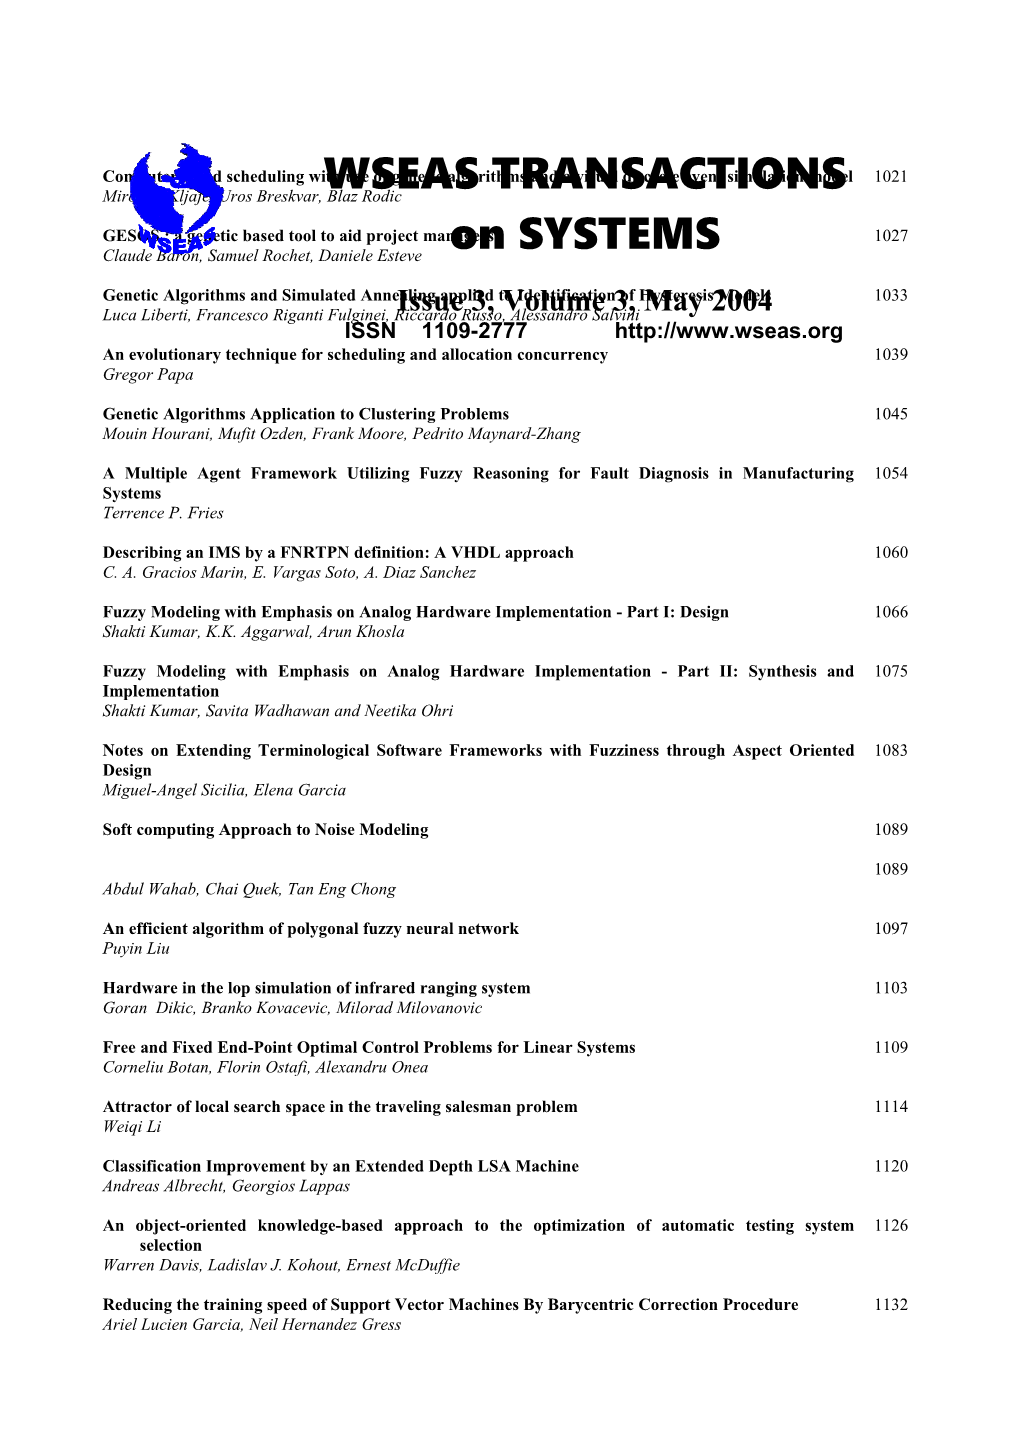 WSEAS Trans. on SYSTEMS, May 2004